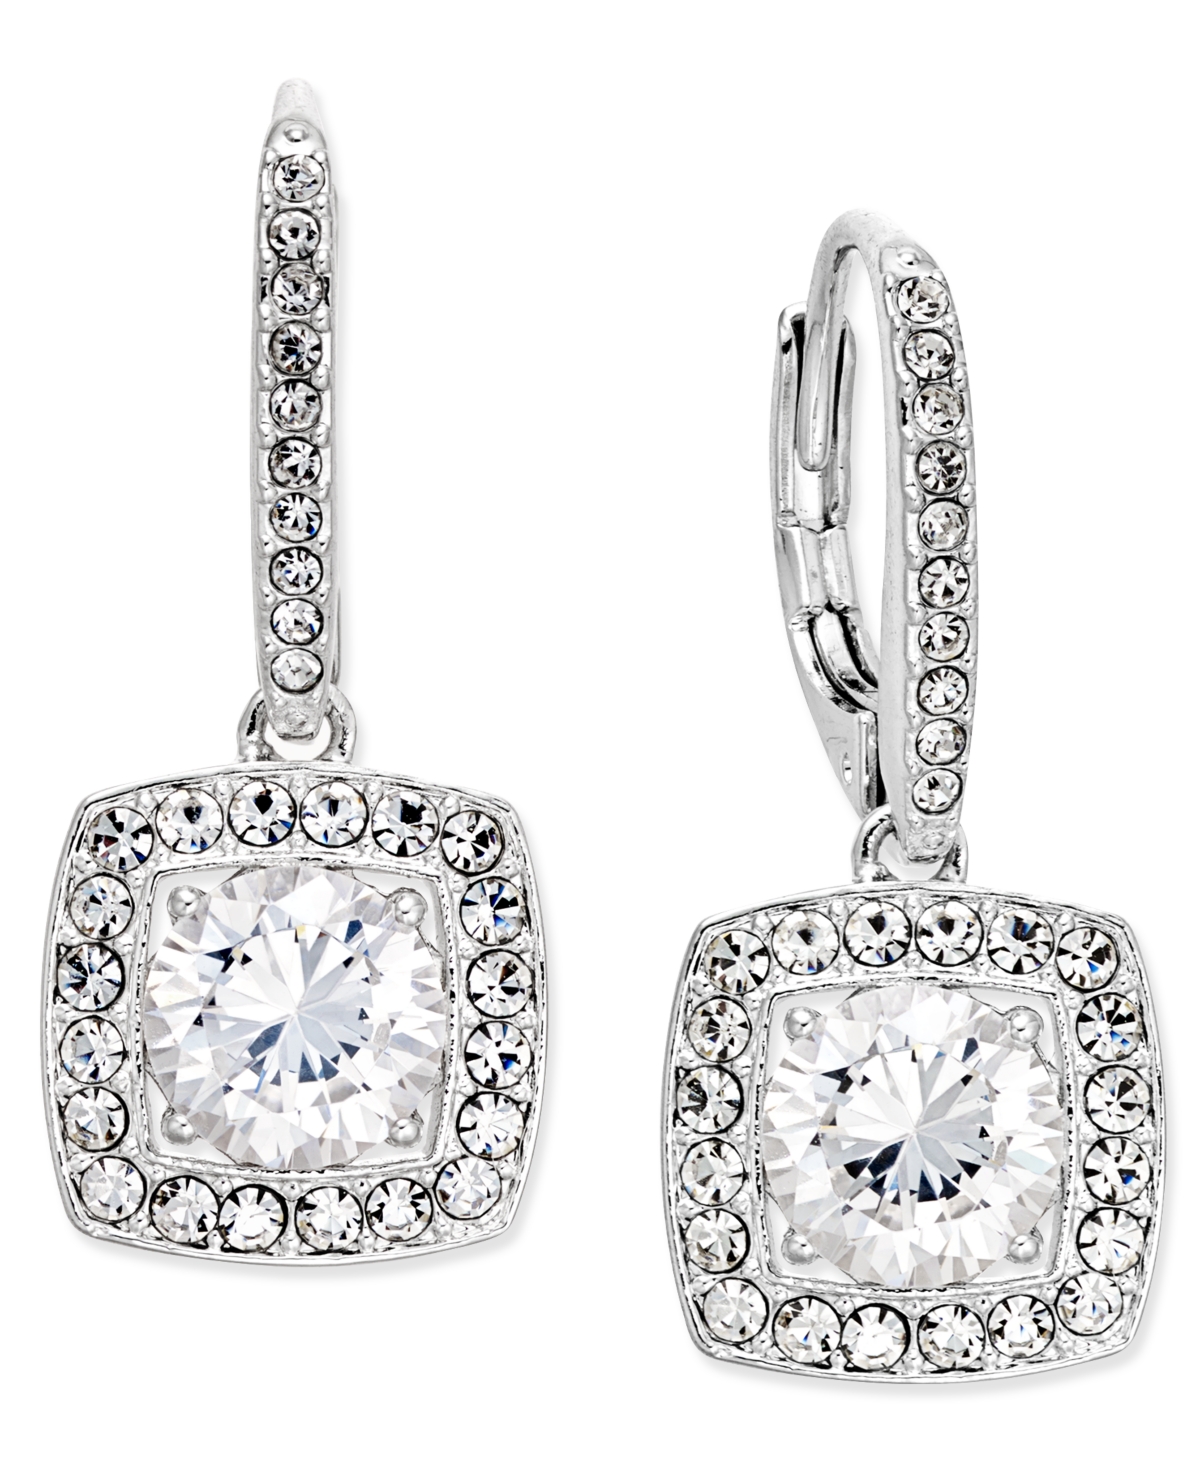 Silver-Tone Crystal Square Drop Earrings, Created for Macy's - Silver